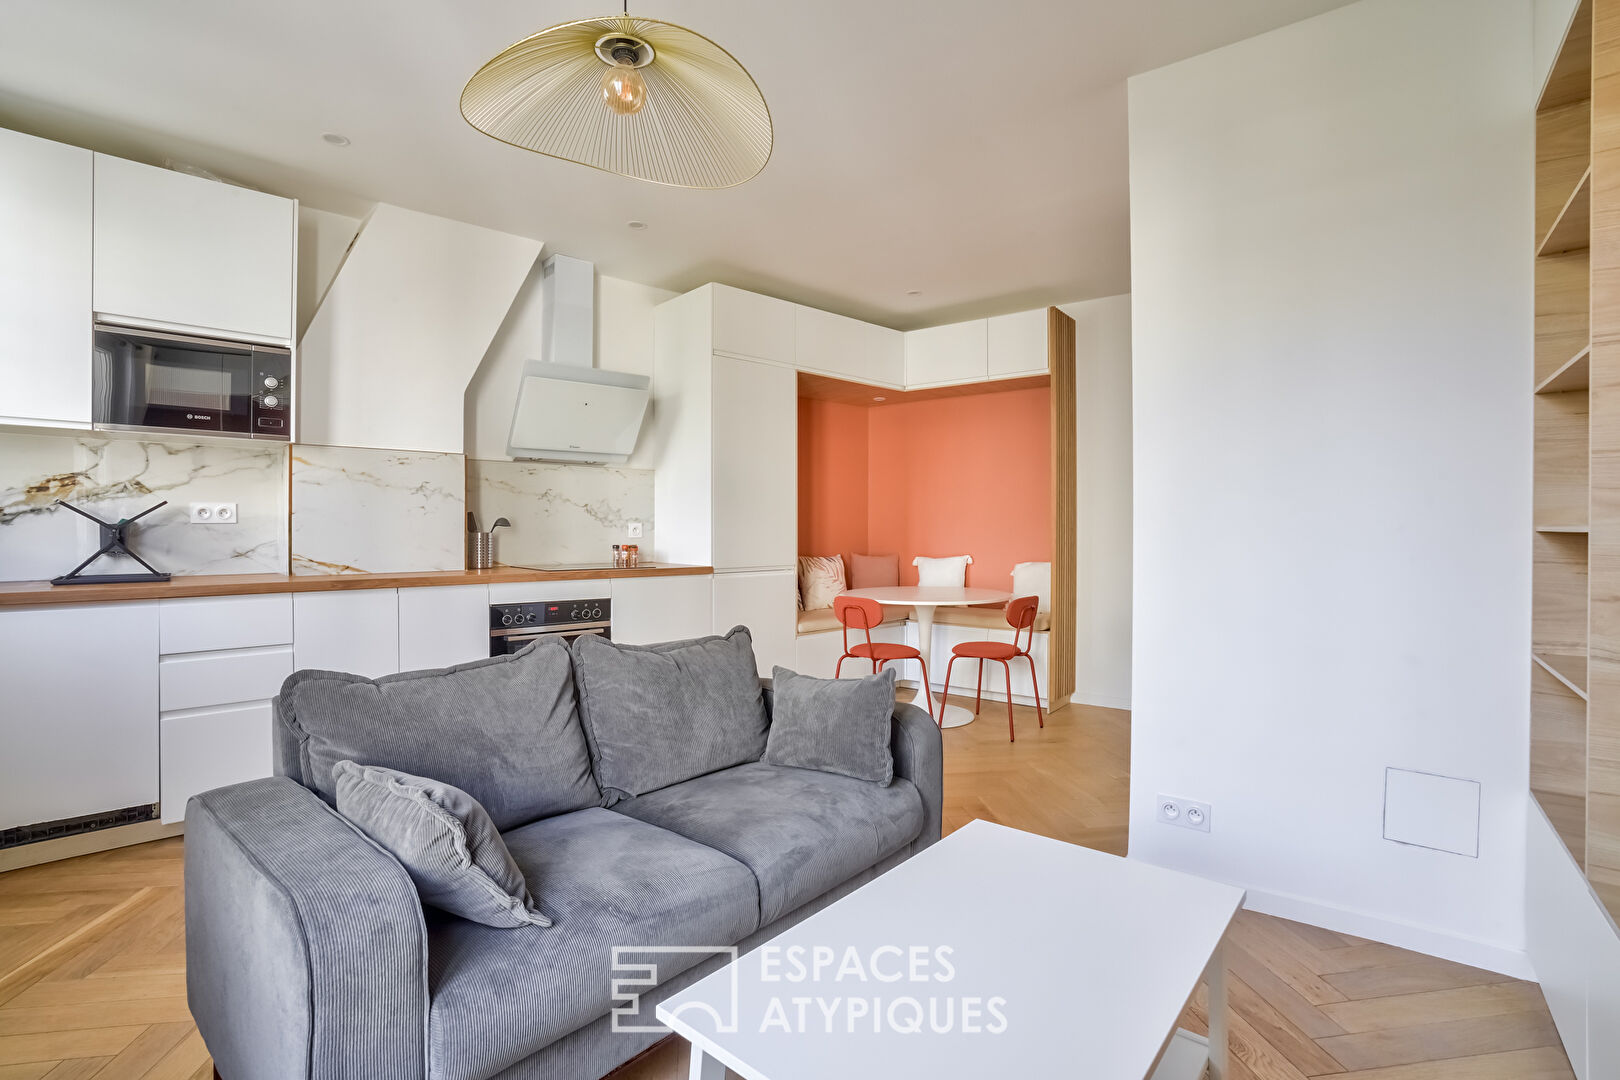 Completely renovated apartment near Courbevoie station